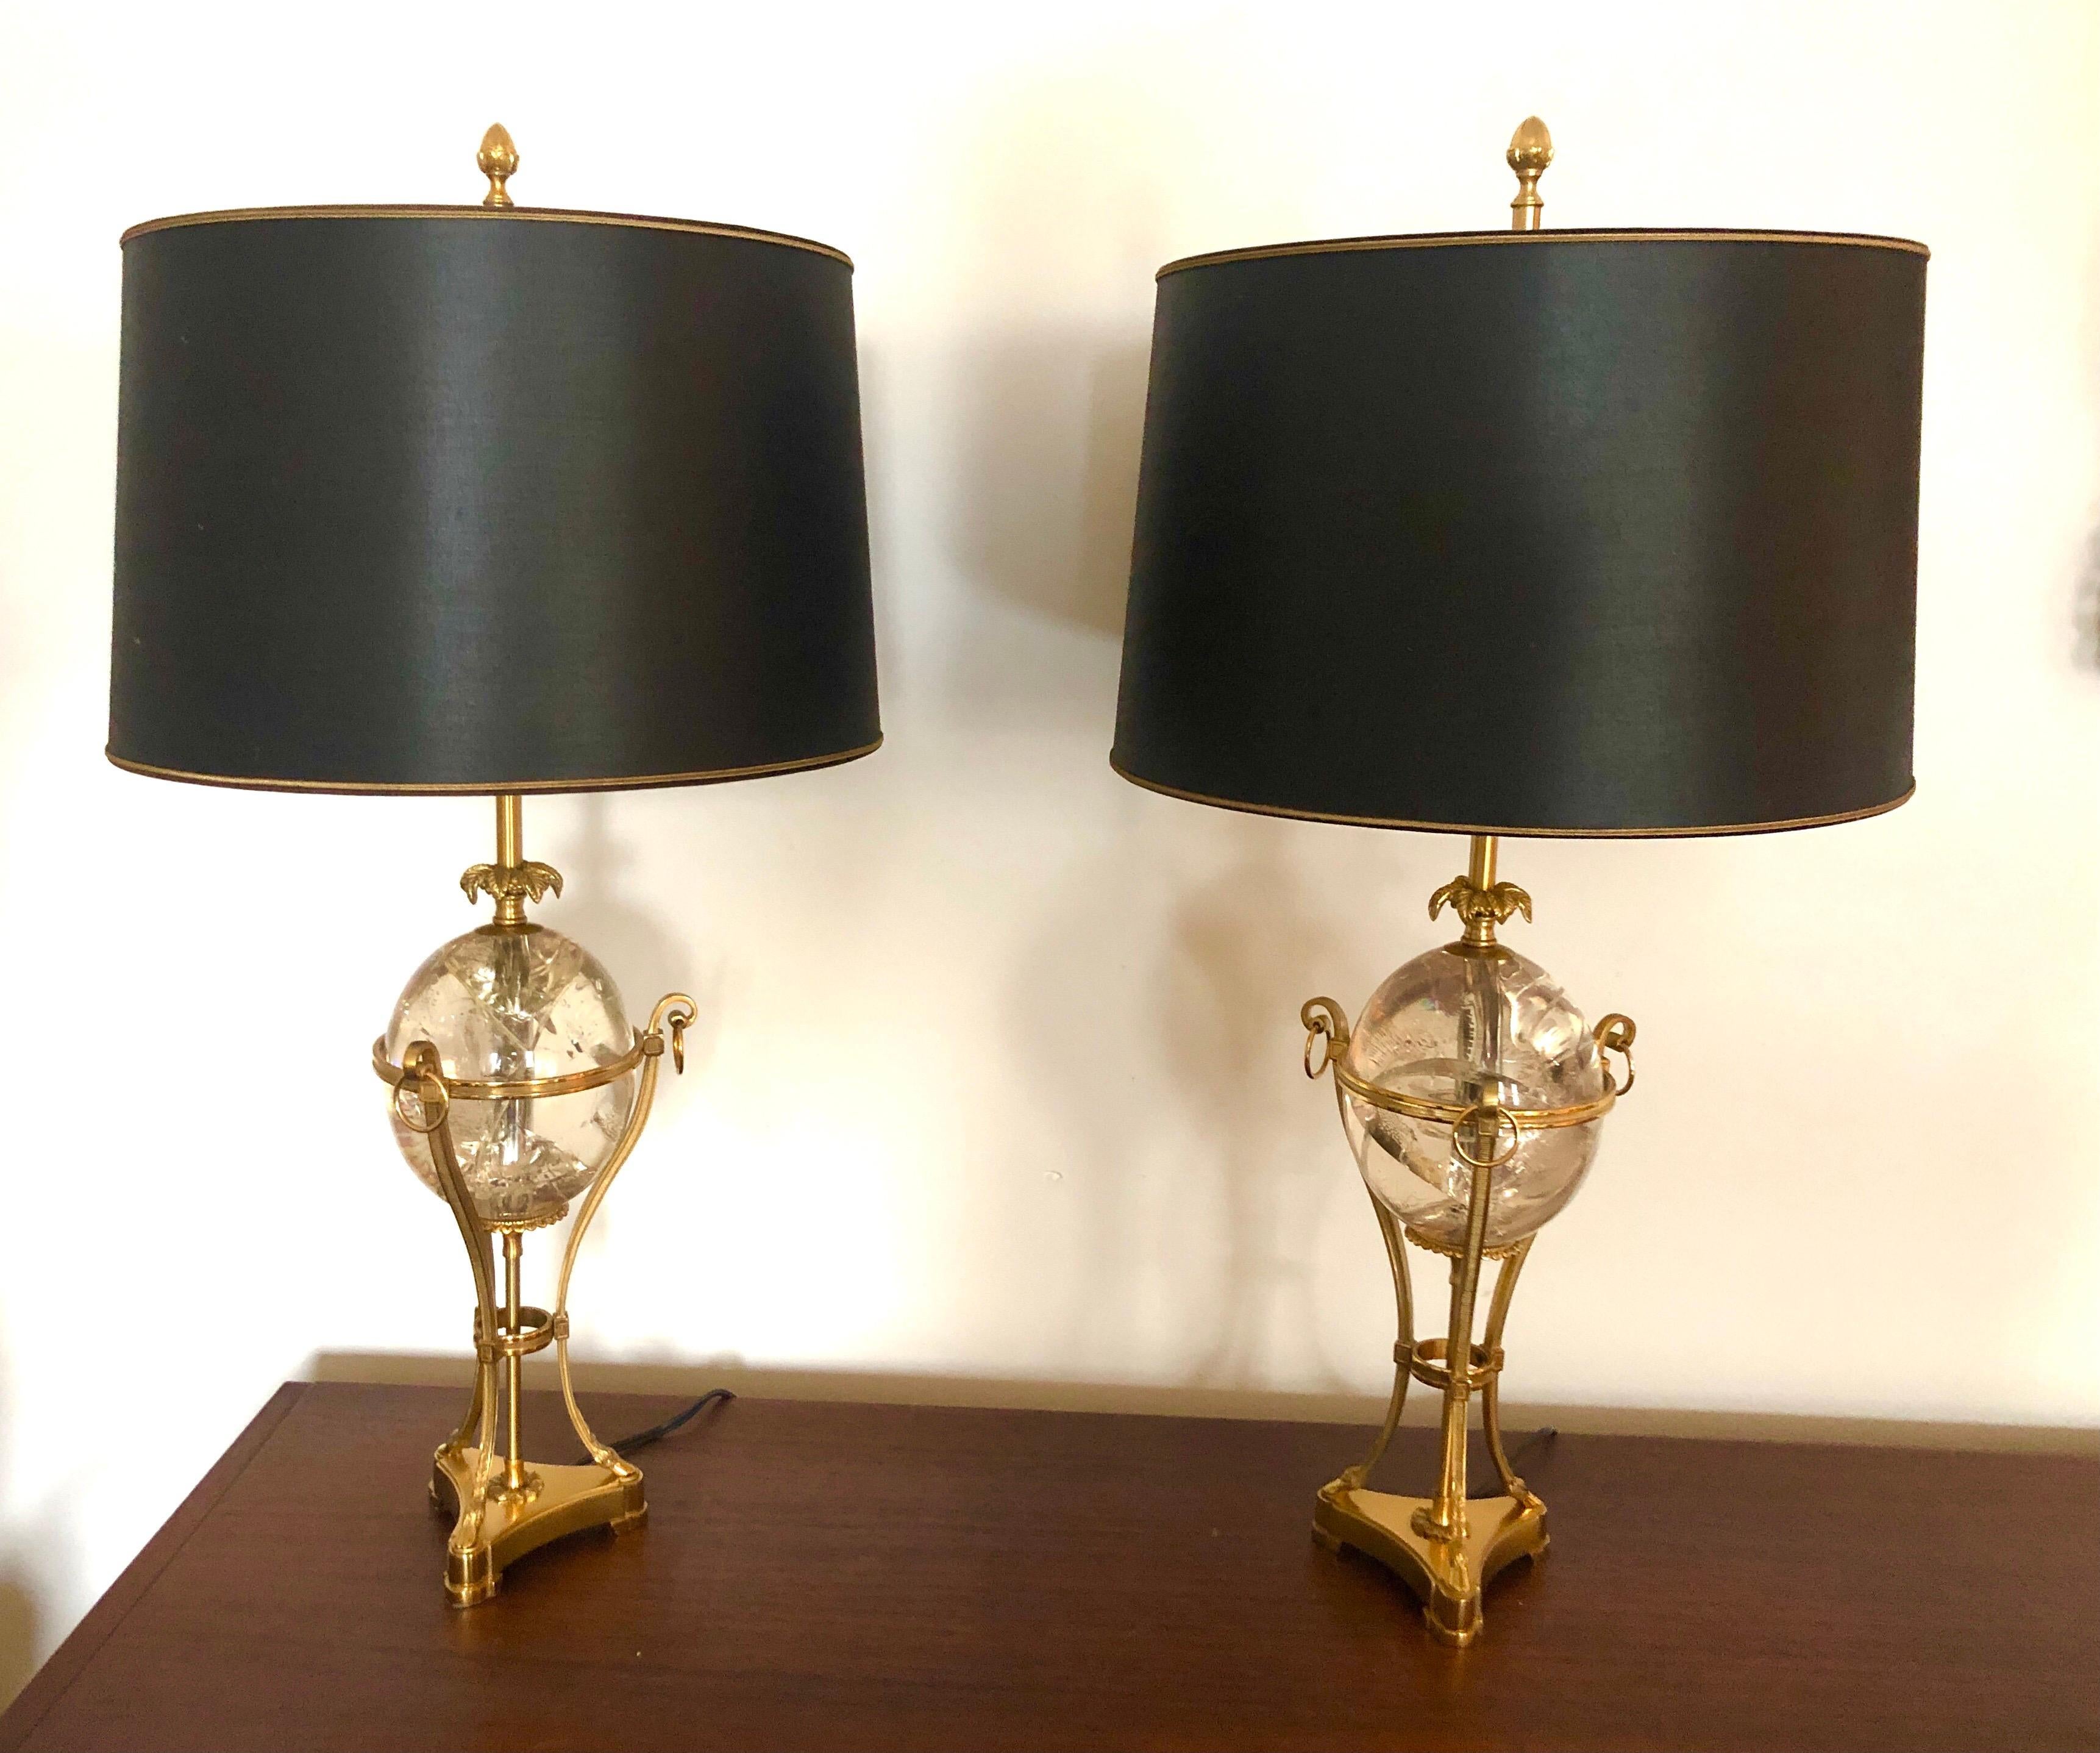 C. 1960s, France, the Louis XVI cassoulet-form table lamps in gold-plated bronze supporting a clear fractal resin orb. Triple-cluster socket with one way switch on the cord. Stamped “Charles Made in France” to base. With original black and gold